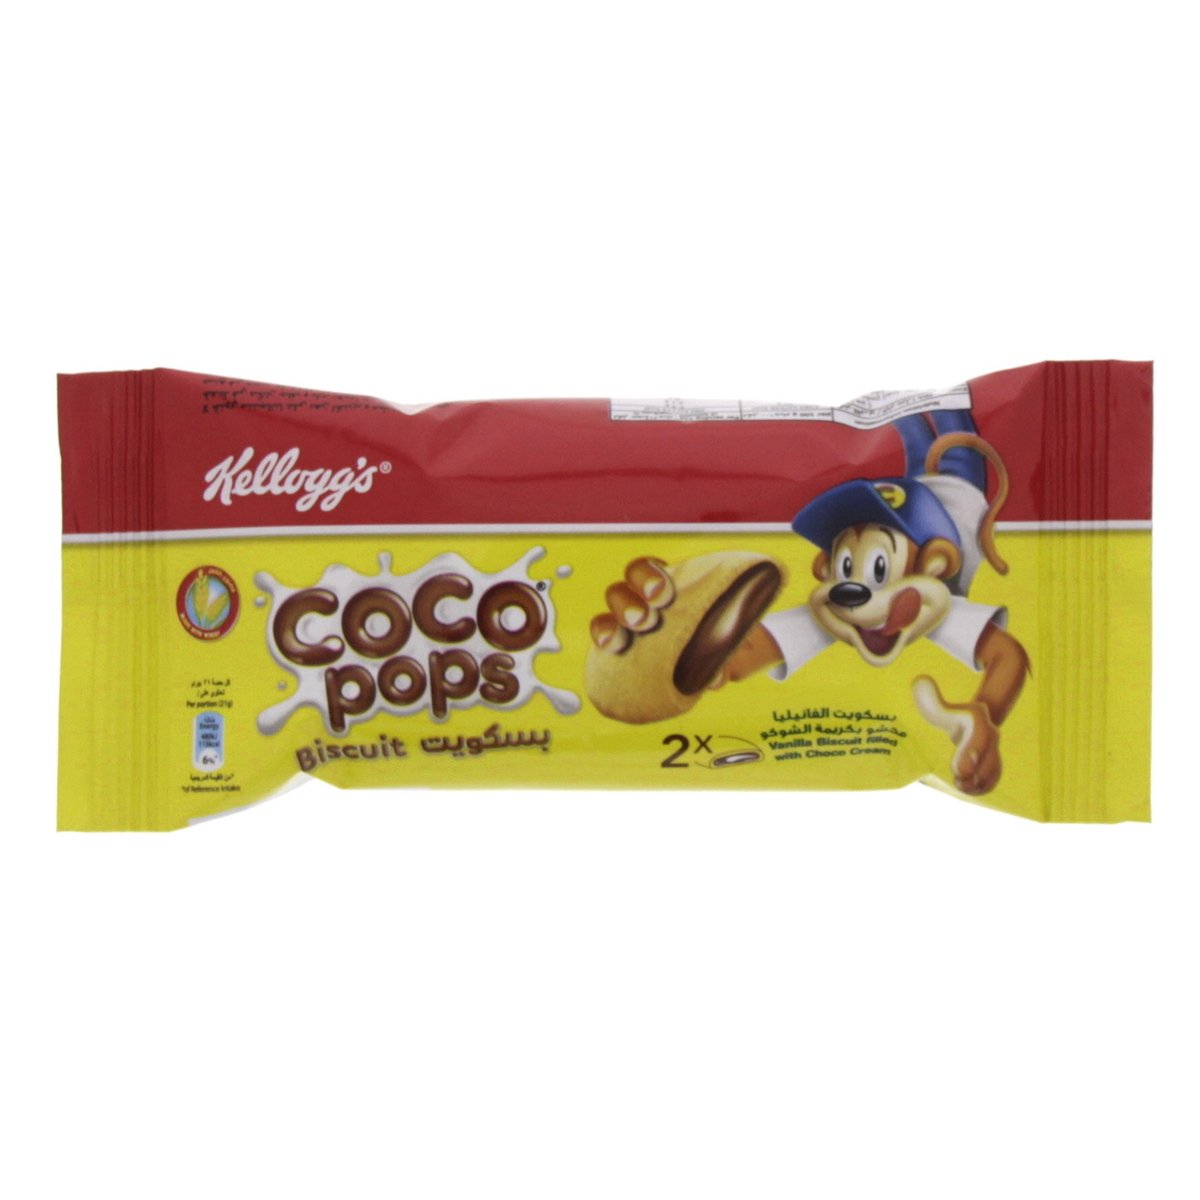 Kellogg's Coco Pops Biscuit Vanilla Biscuit Filled With Choco Cream 21 g